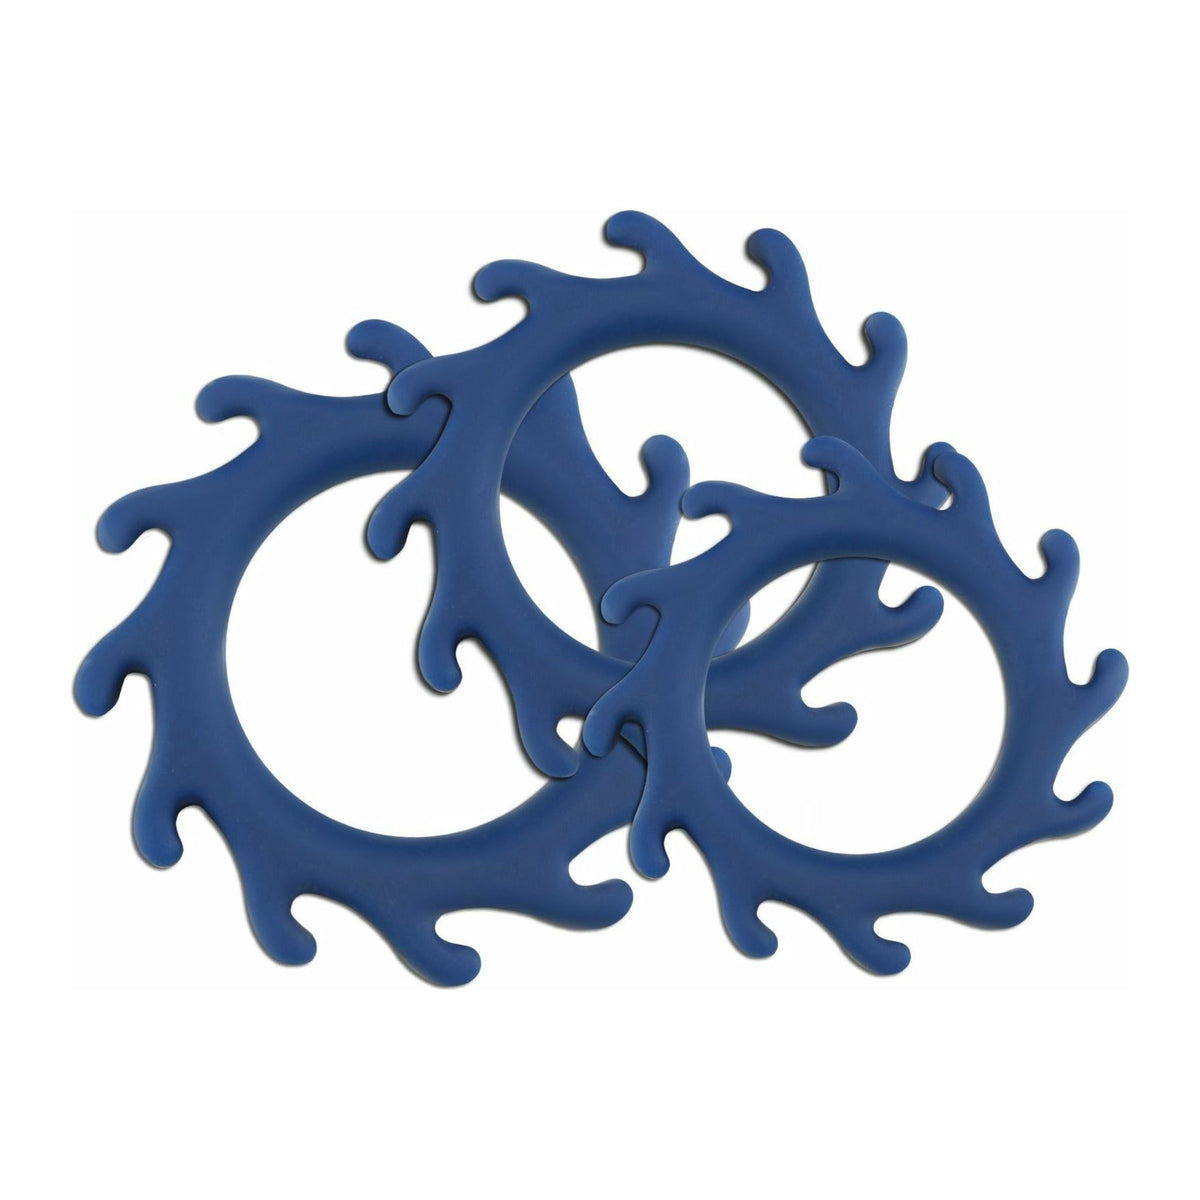 NMC Enhance - 3 Silicone Cock Rings - Blue